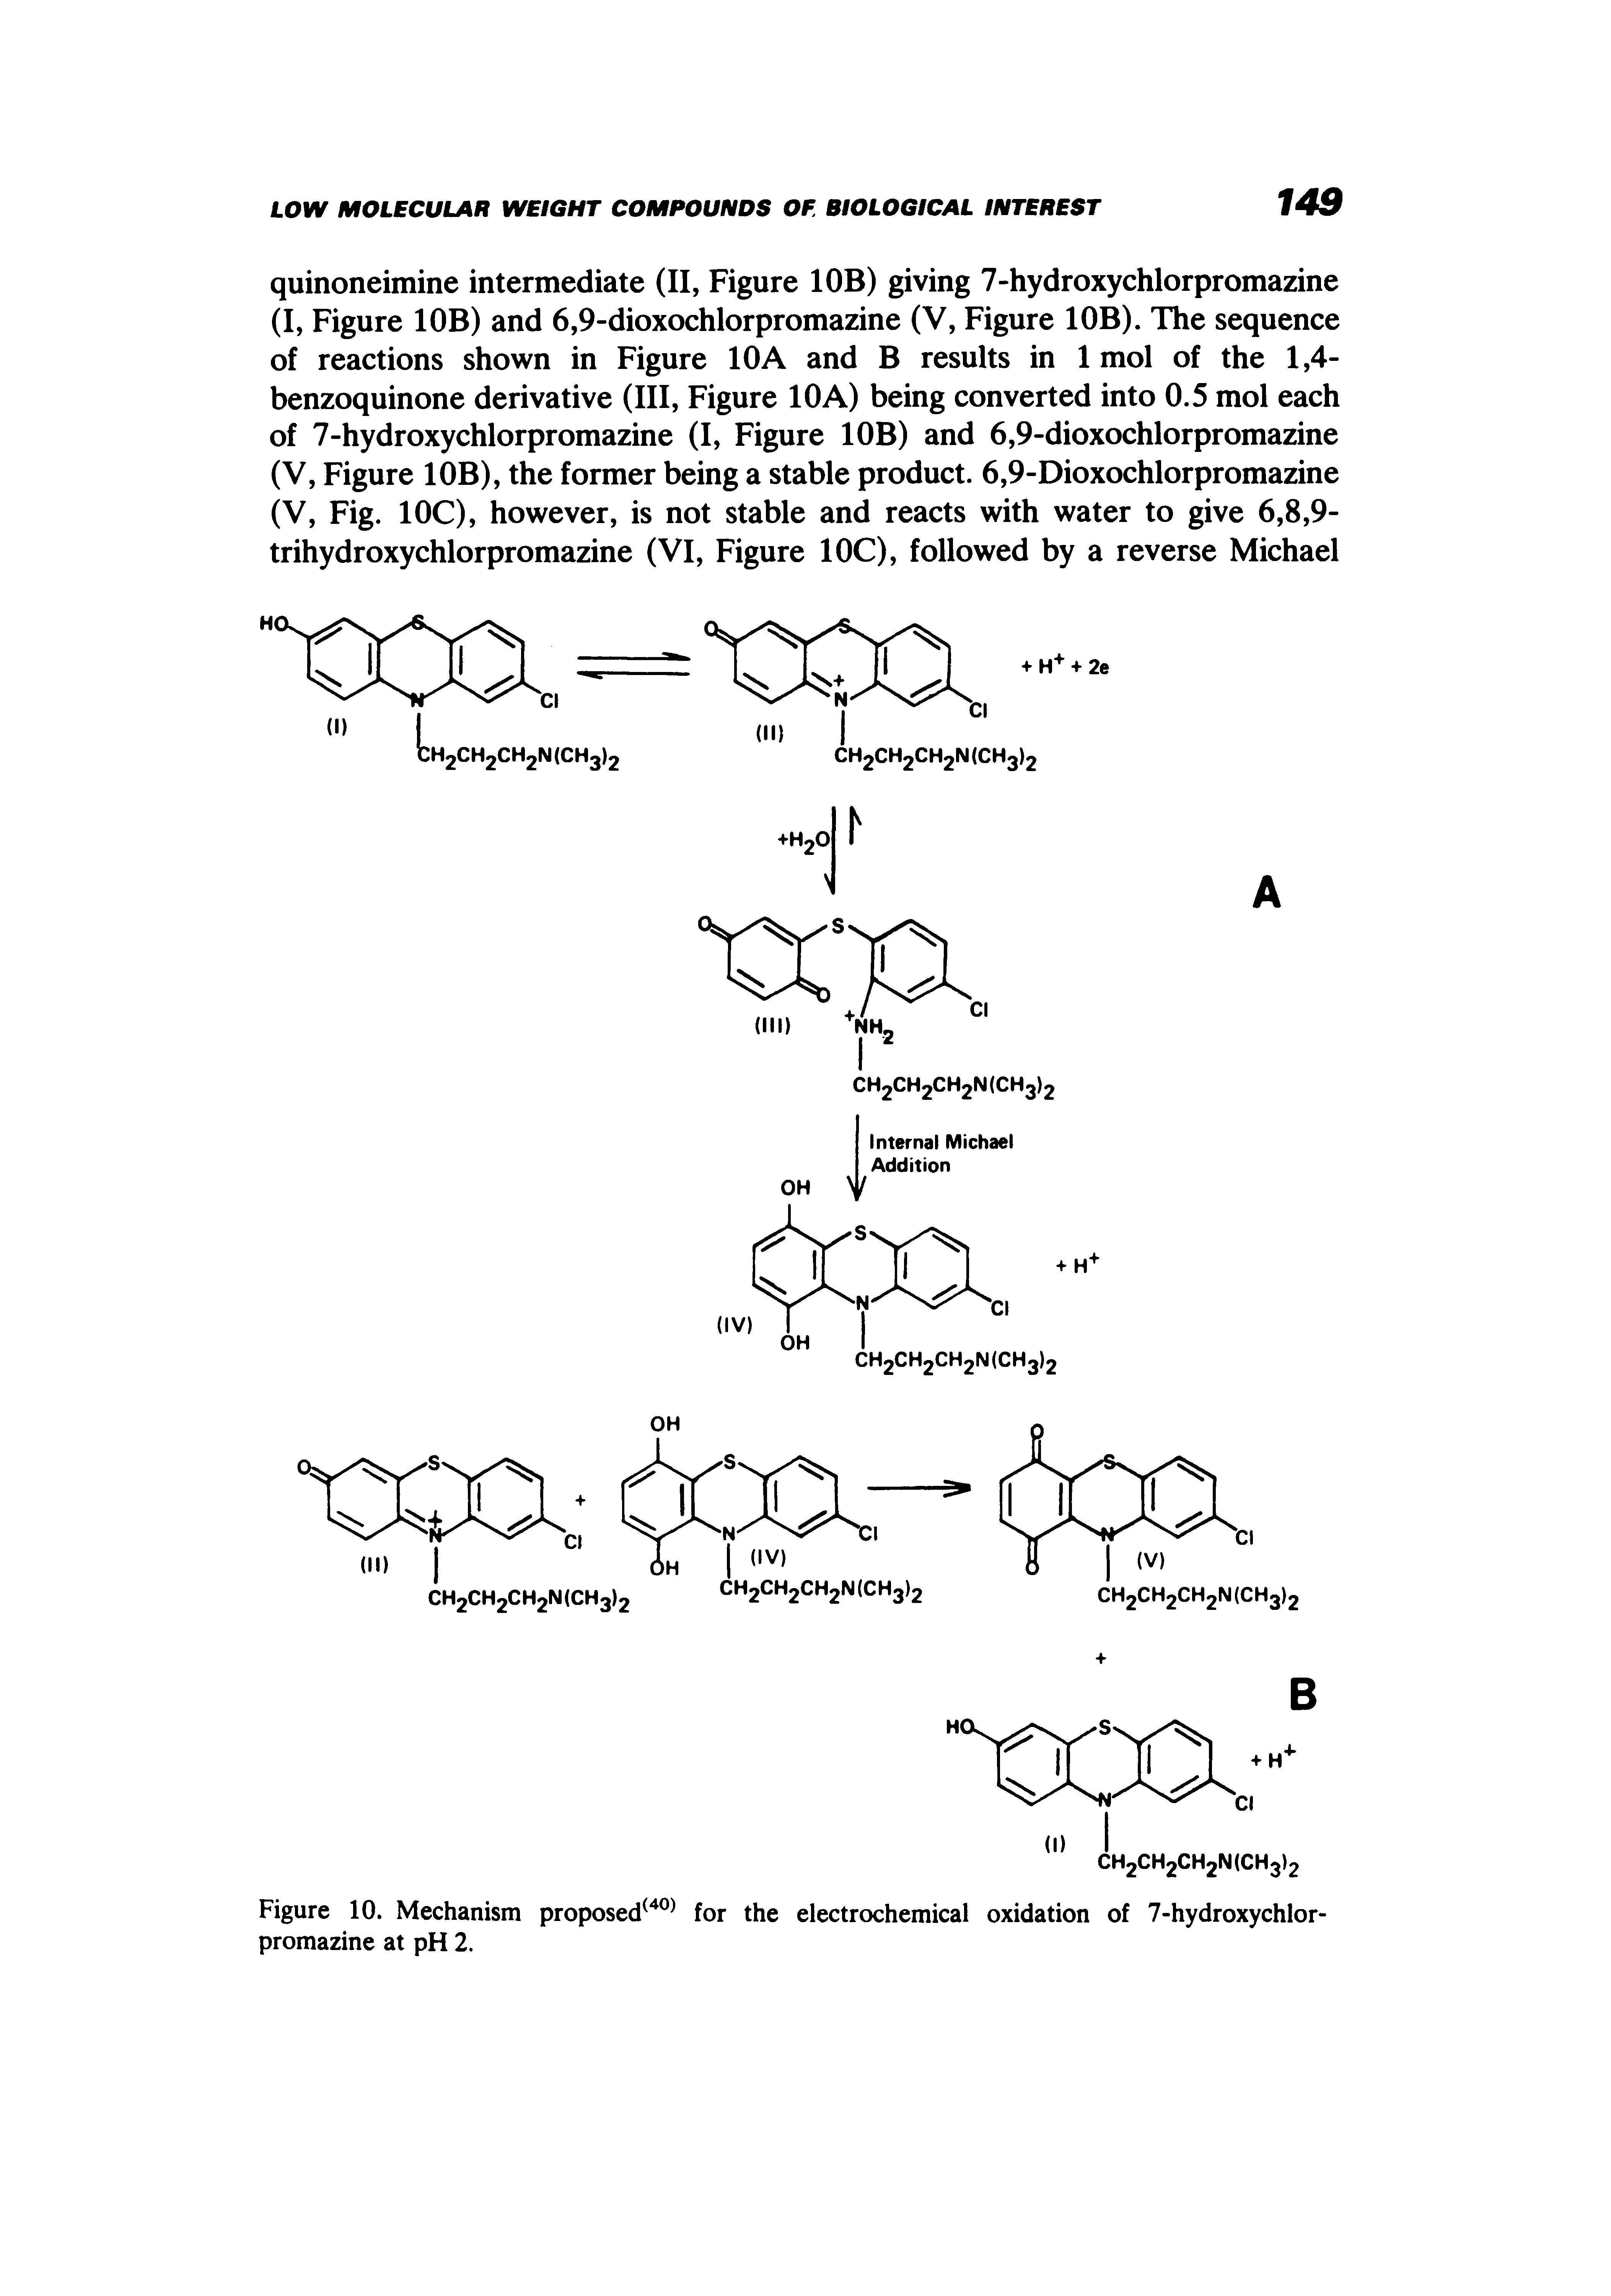 Figure 10. Mechanism proposed " for the electrochemical oxidation of 7-hydroxychlor-promazine at pH 2.